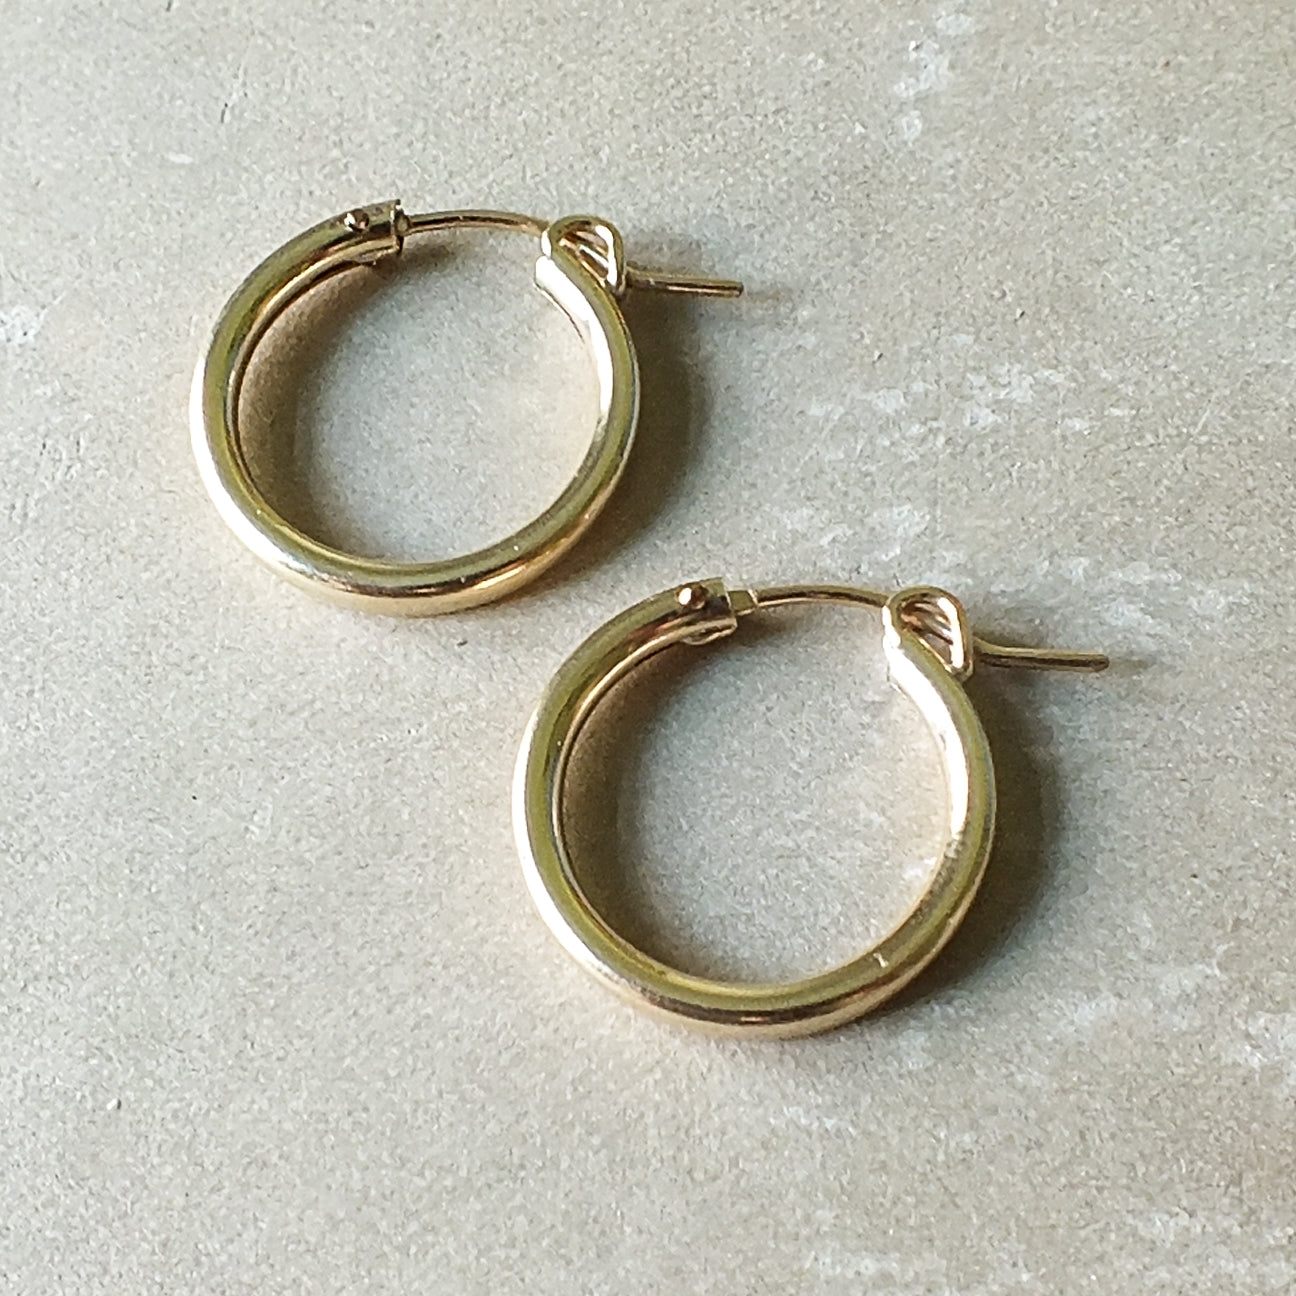 A pair of Becoming Jewelry Everyday Hoop Earrings, large on a gray surface.